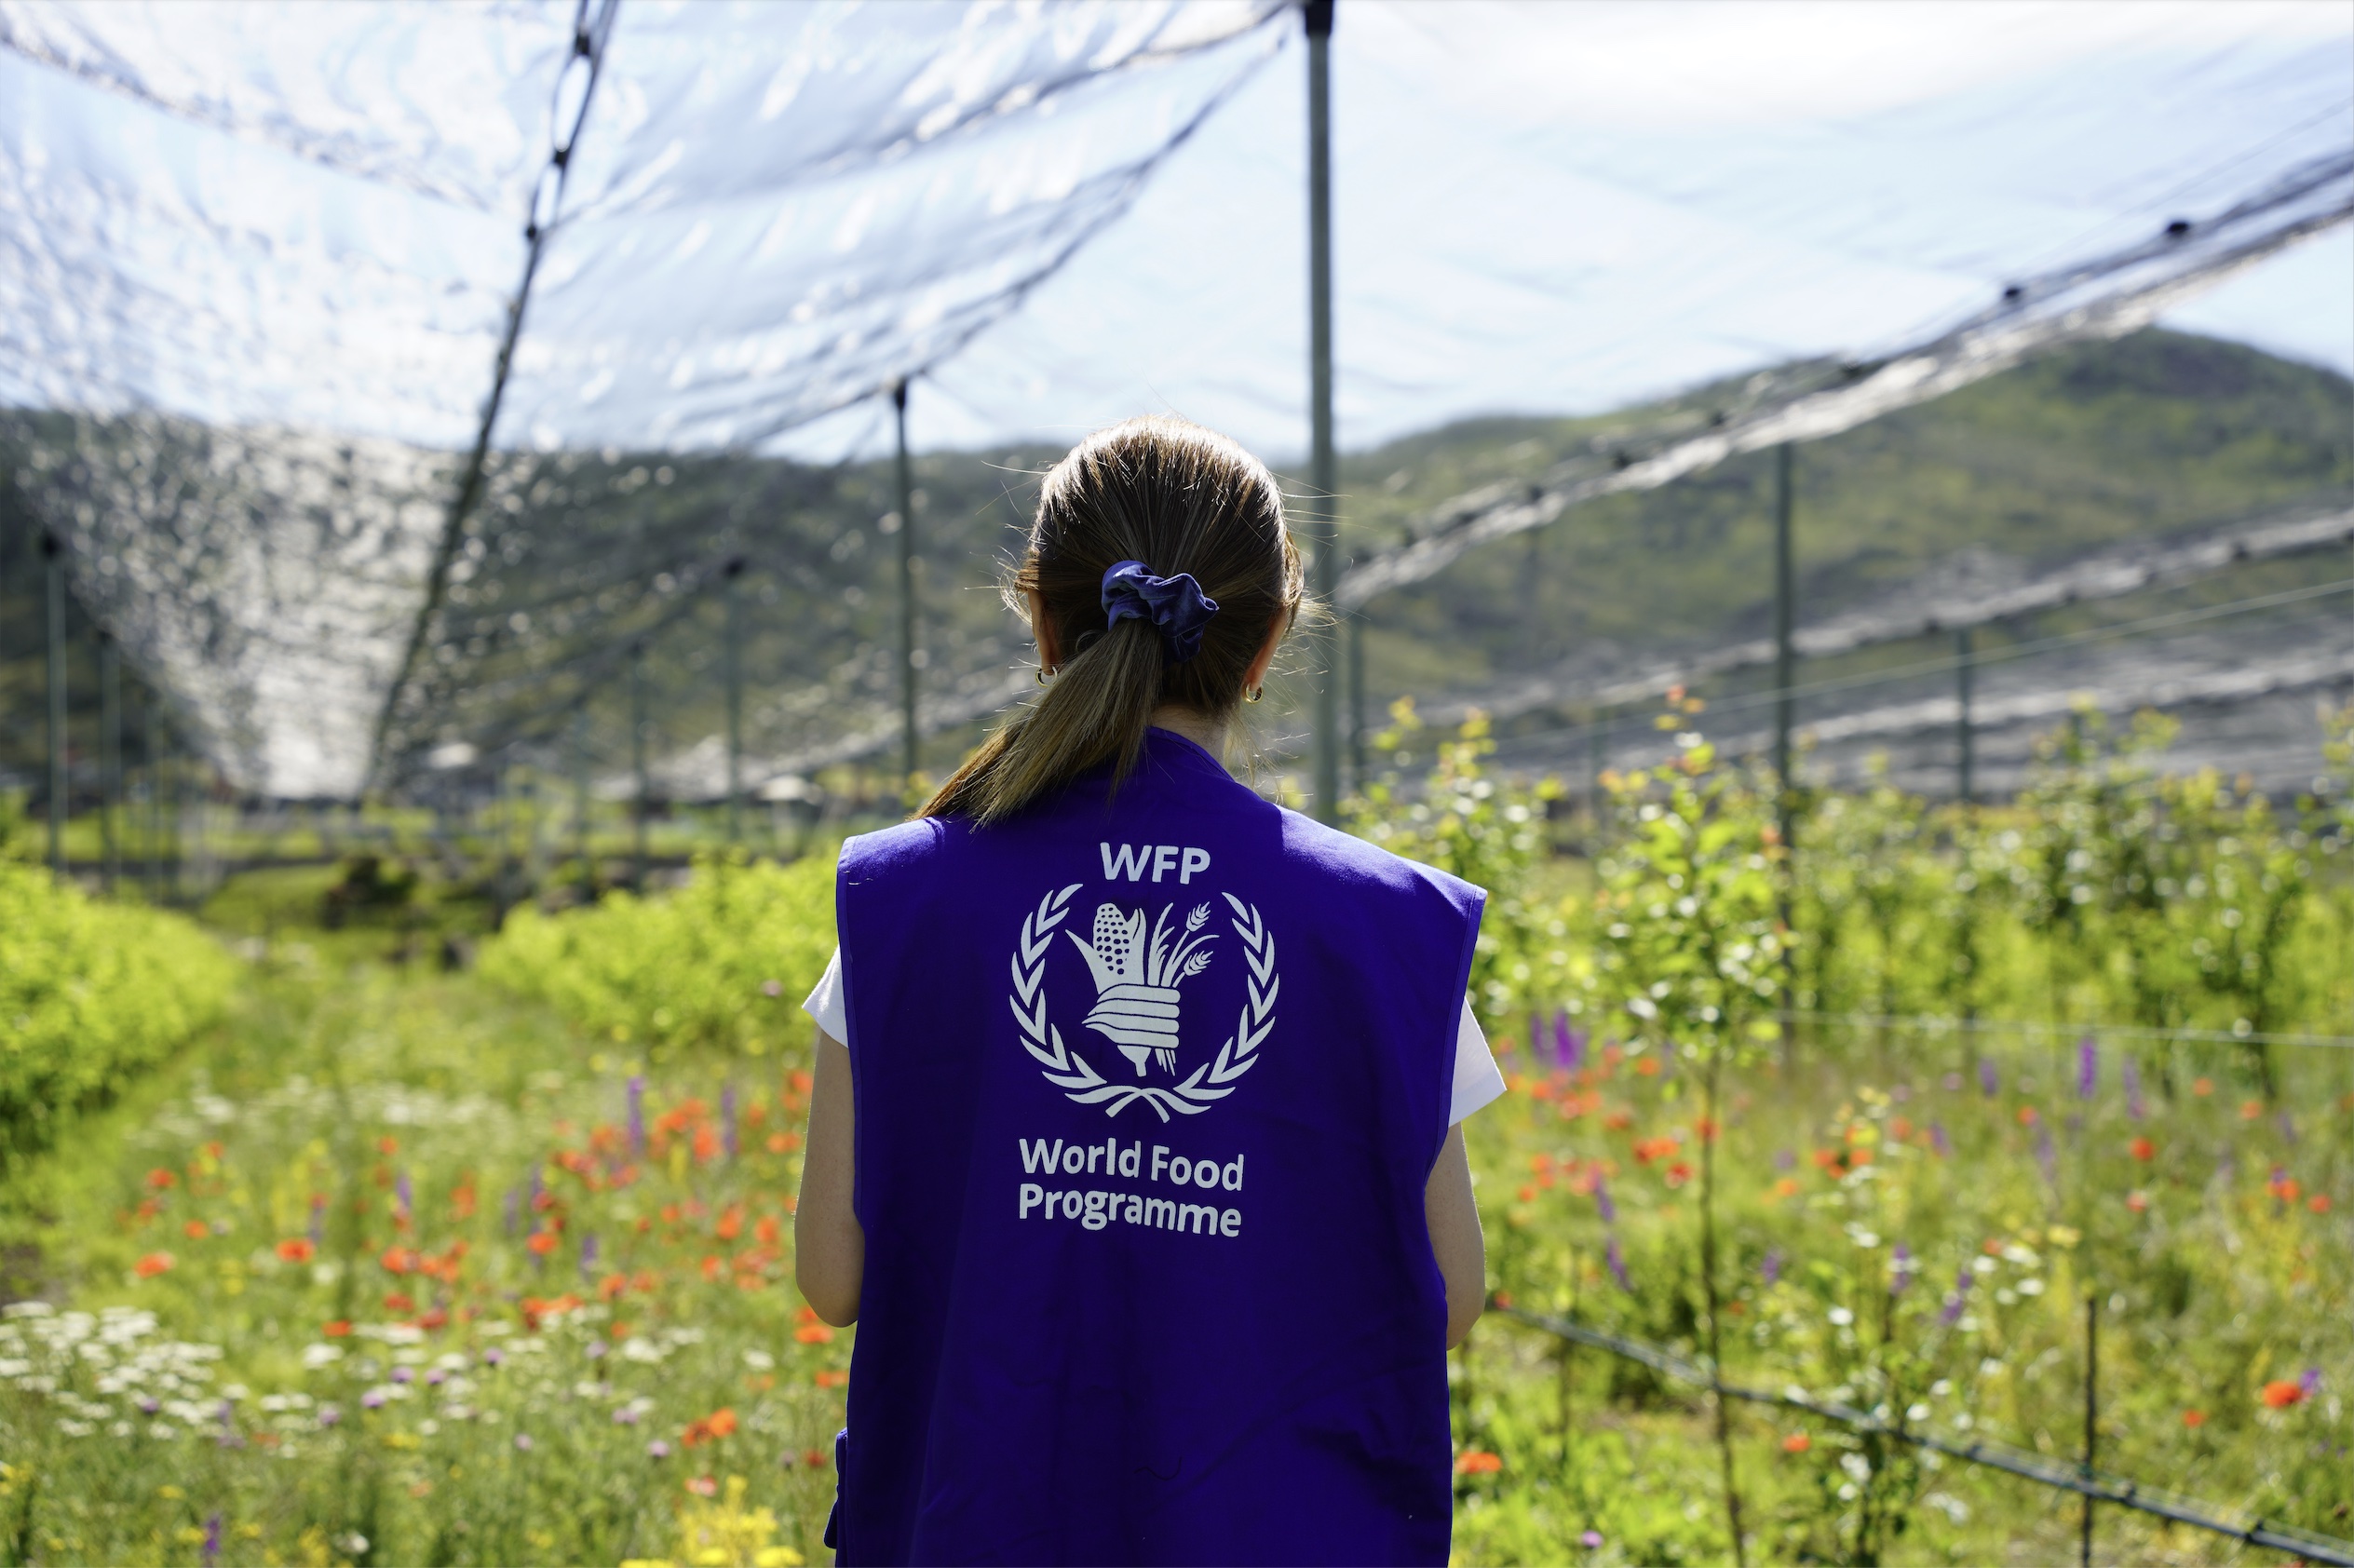 A WFP staff member looking out across a farm. Photo: WFP/Mariam Avetisyan